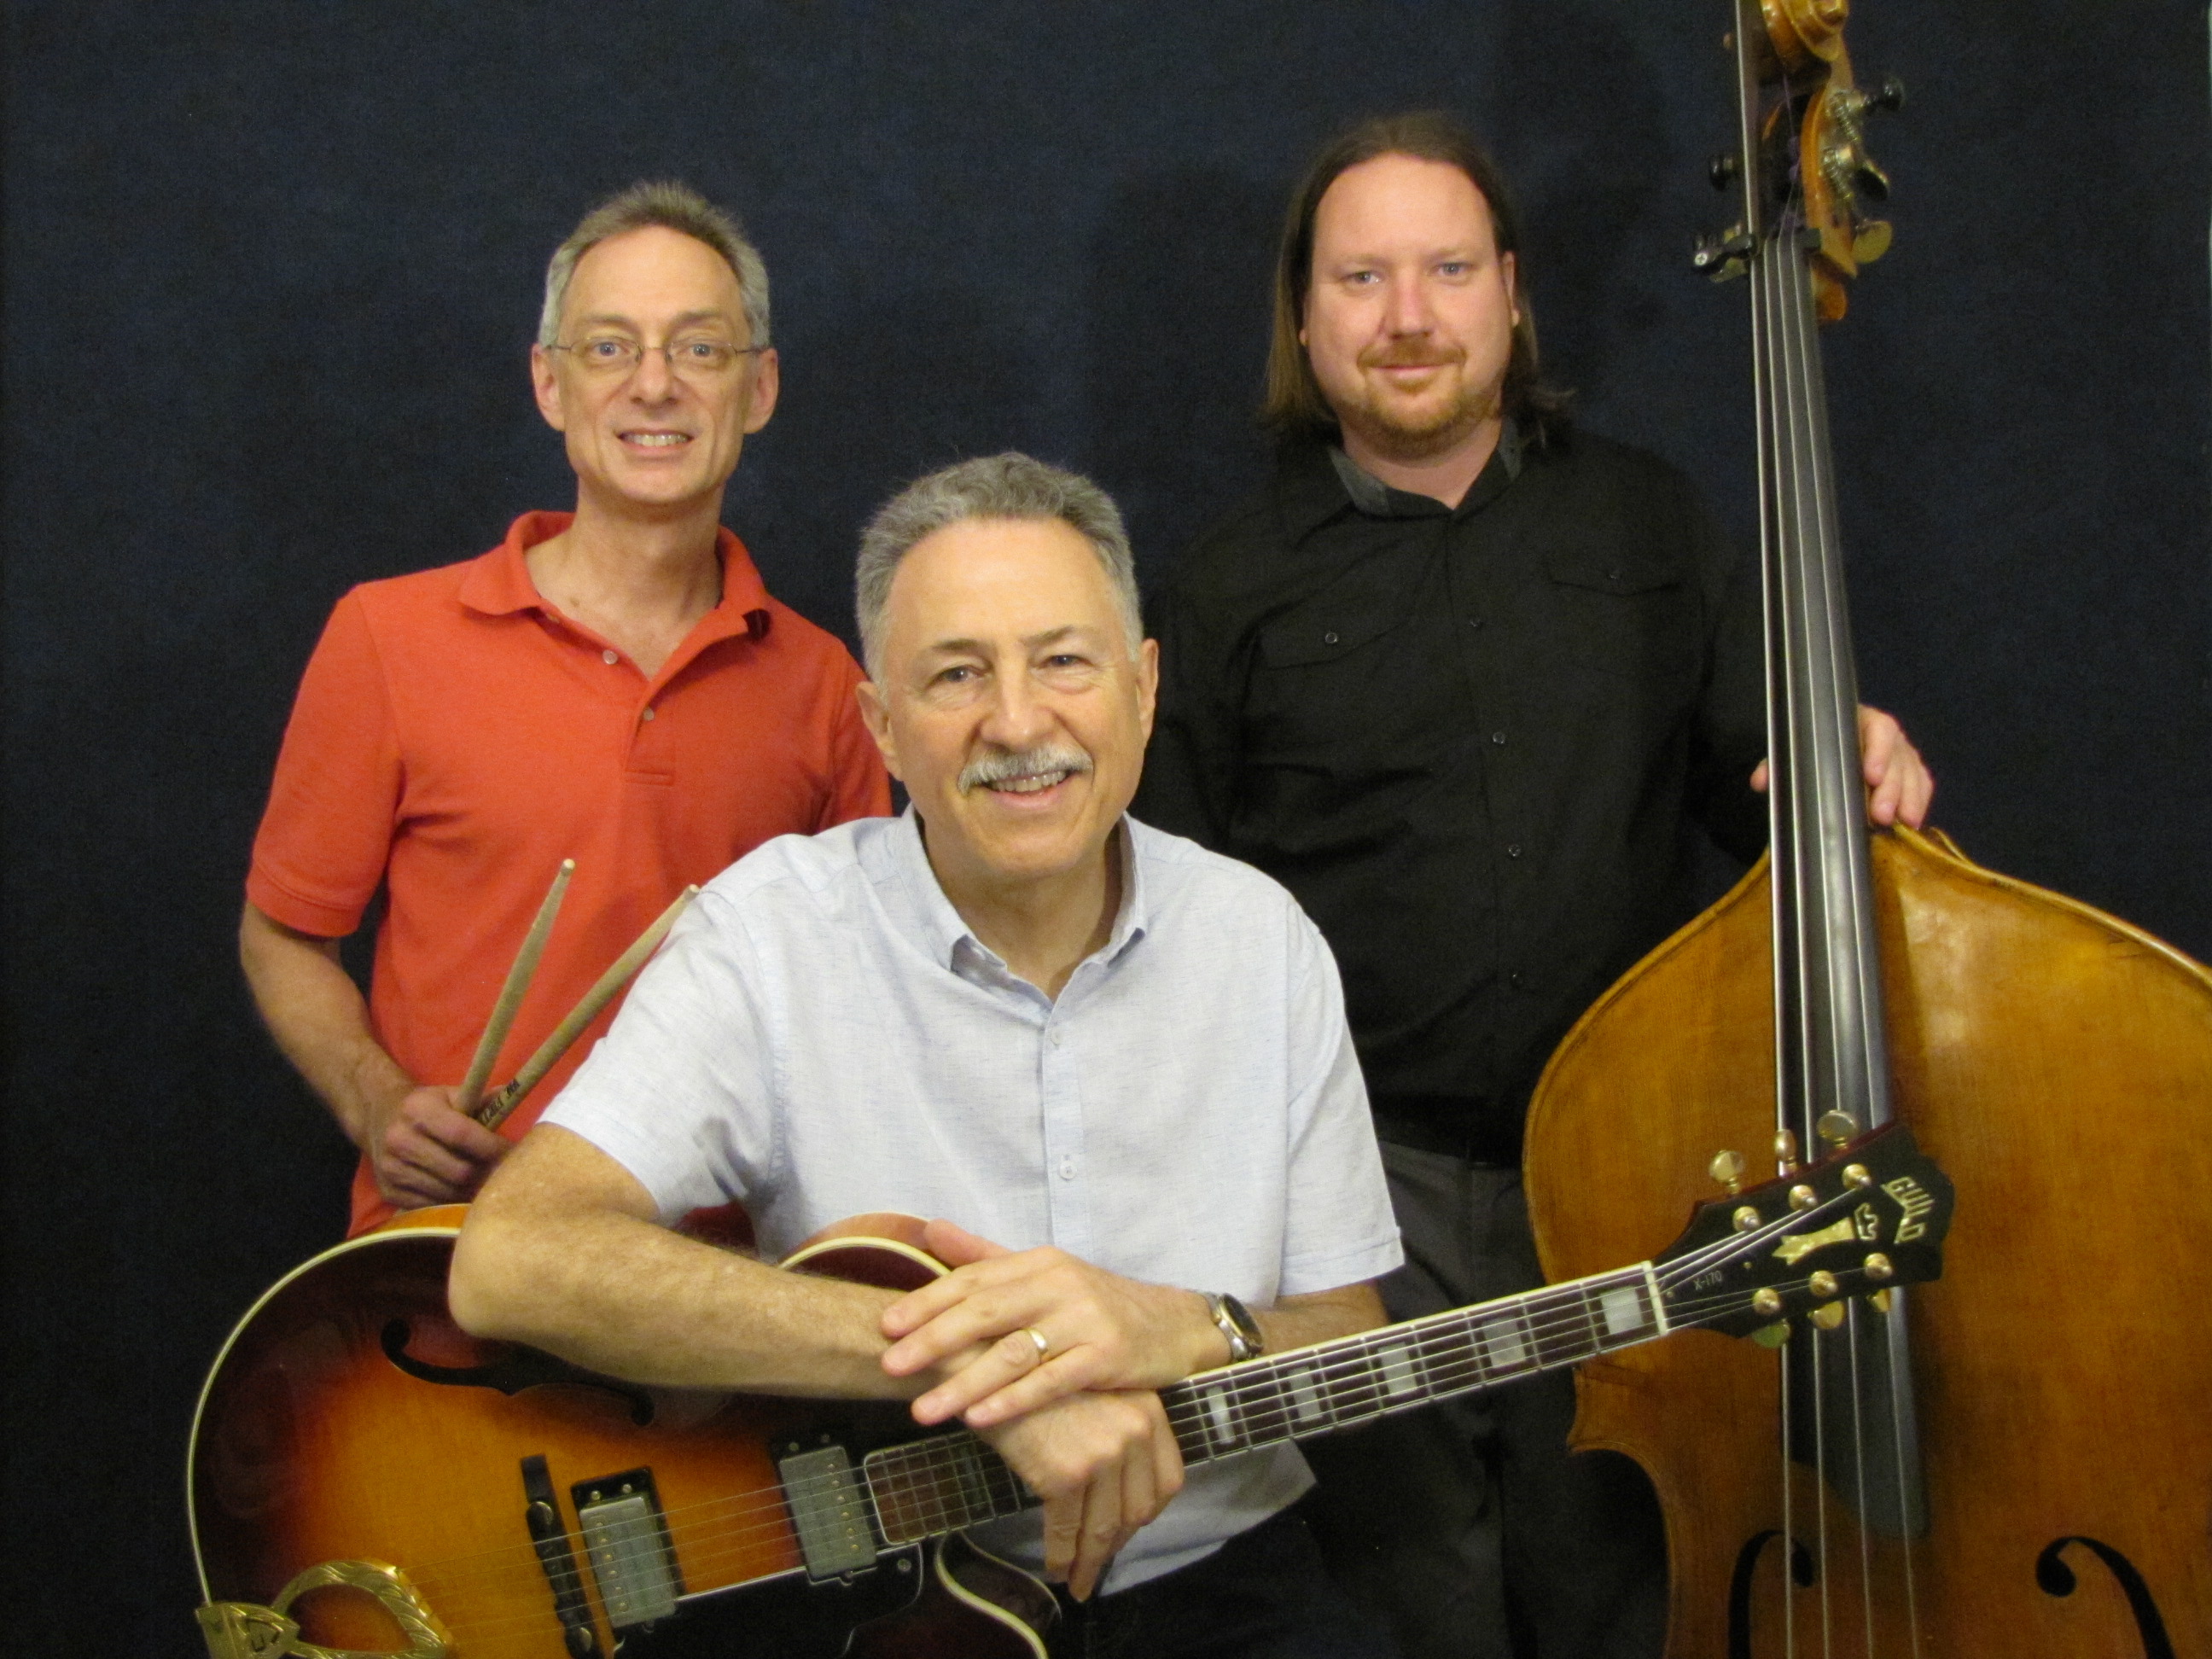 My new group, The Amuse Blues Jazz Trio, founded 2018. Featuring Paul Shumsky (guitar), Ryan Ford (bass), Steve Dauphinais (drums).